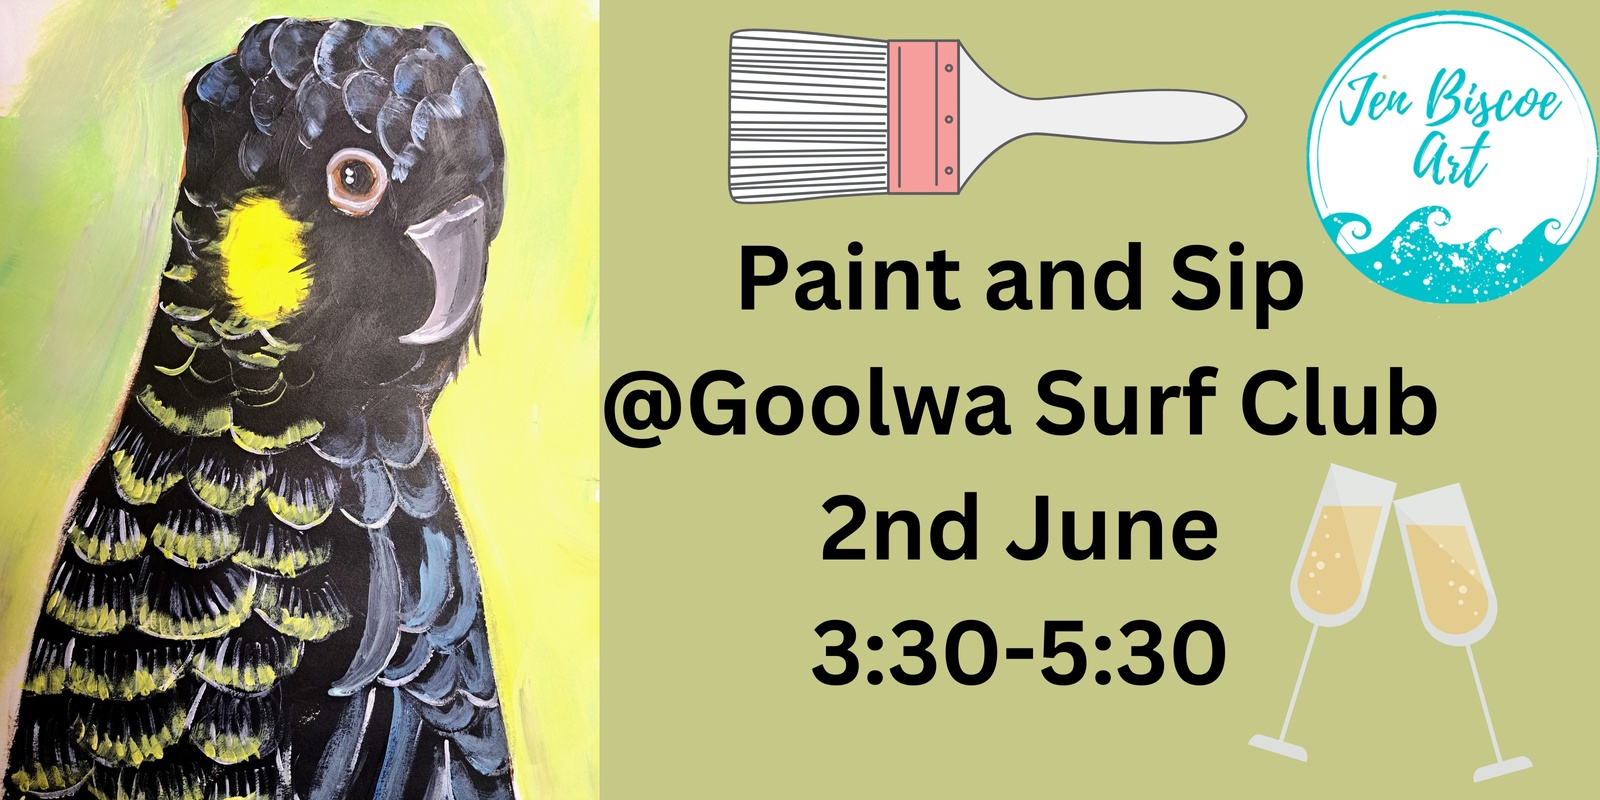 Banner image for Cockatoo Paint and Sip at Goolwa